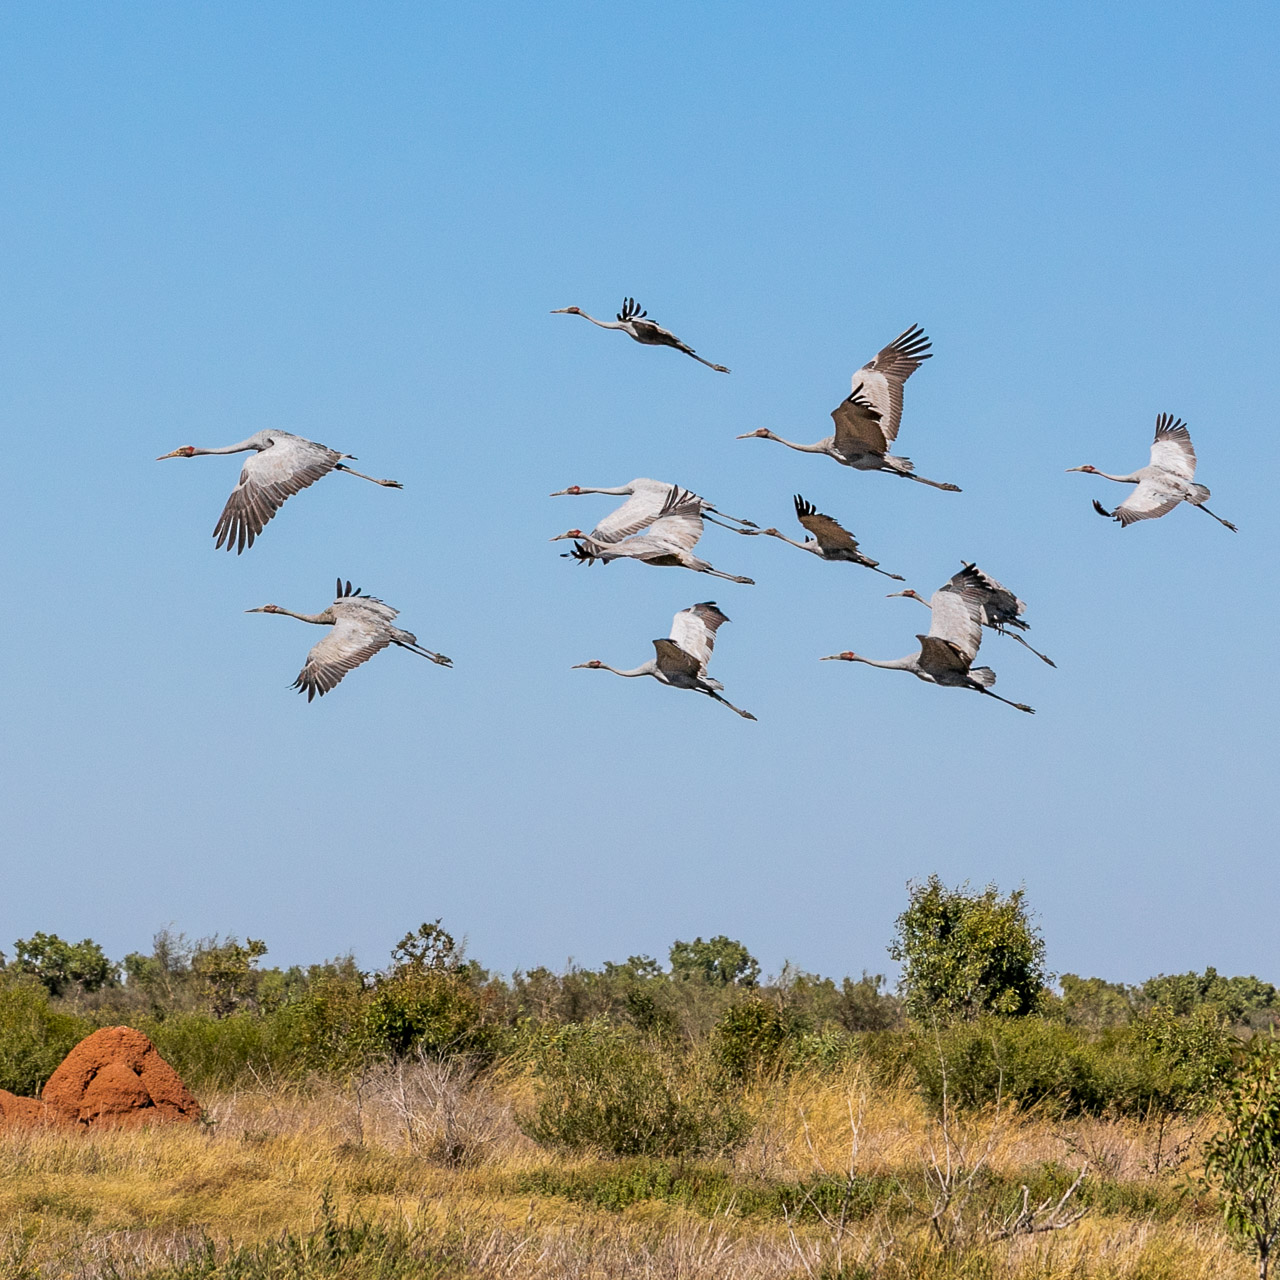 Brolgas in flight over the termite mounds in the Pilbara